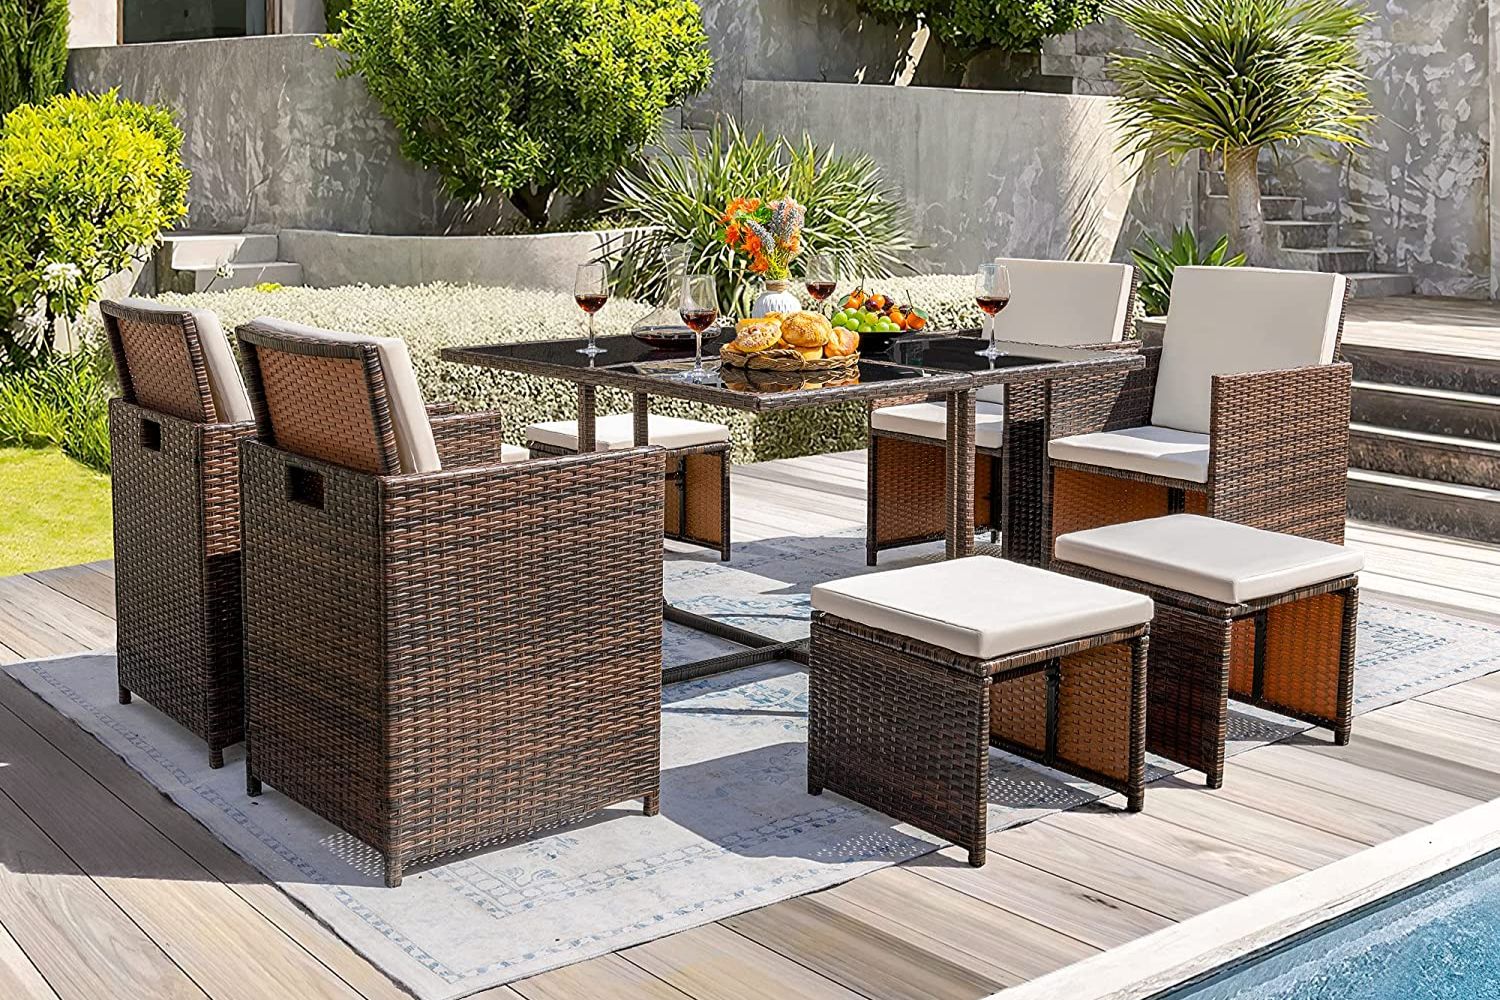 Everything You Need for a Backyard Cookout Options: Devoko 9 Piece Patio Dining Set